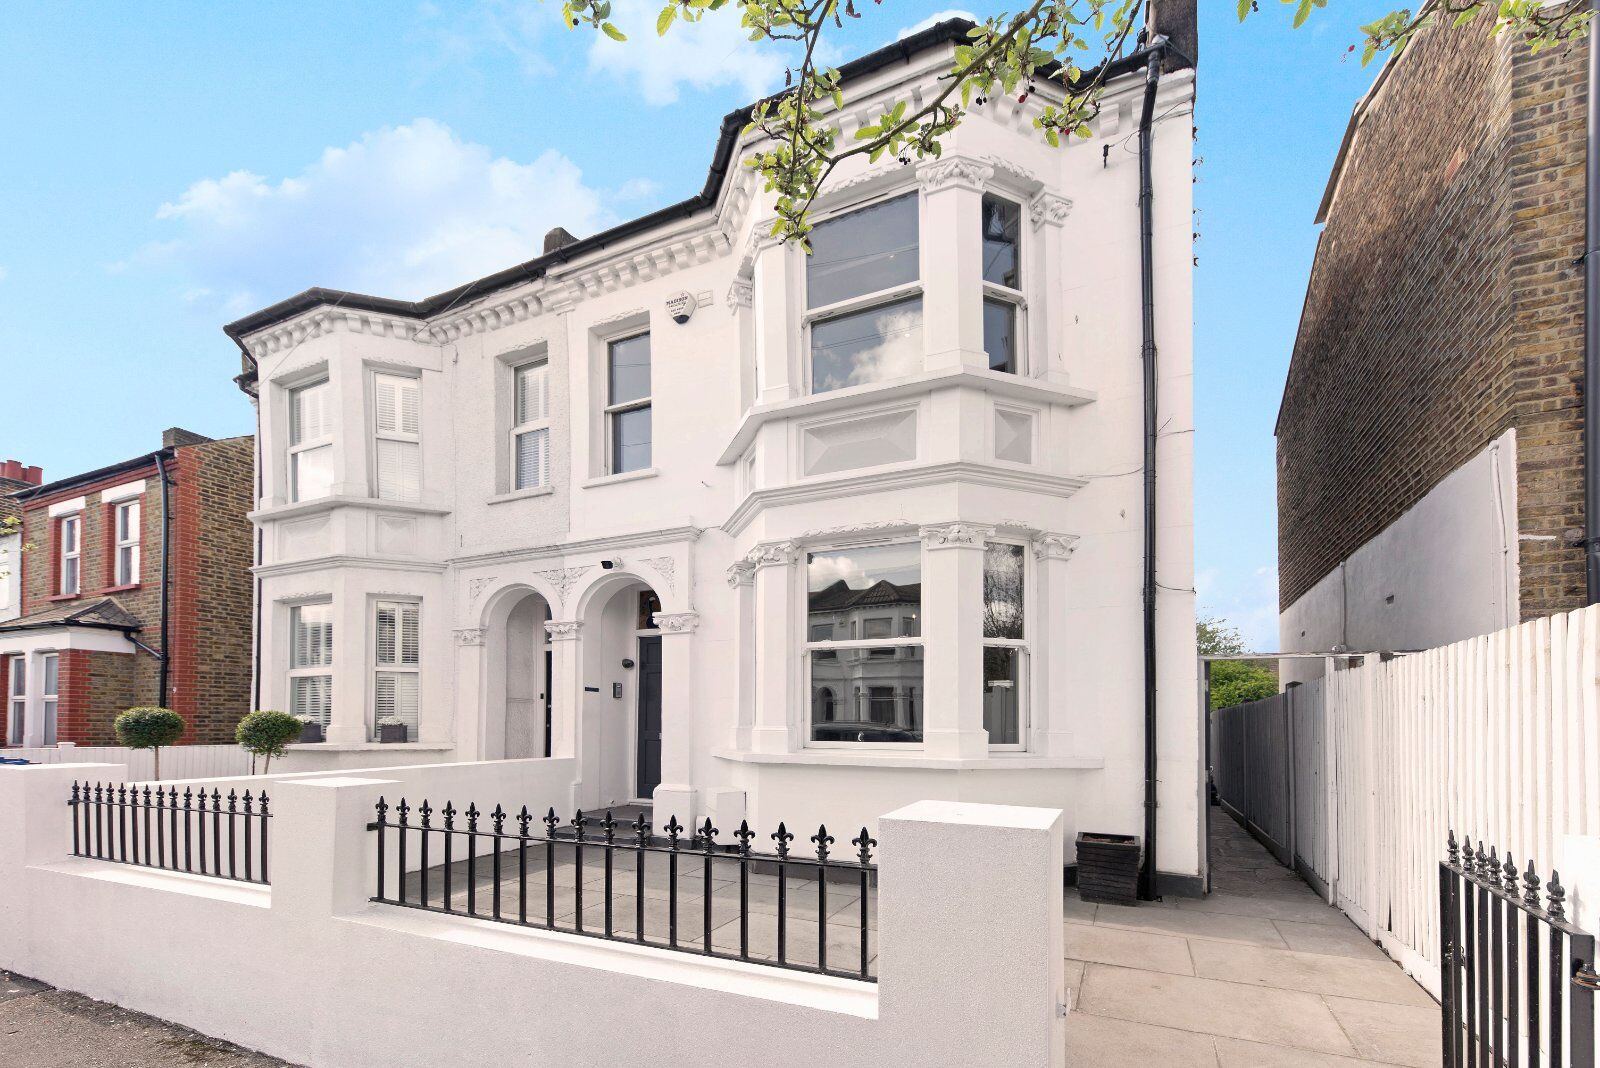 4 bedroom semi detached house for sale Chestnut Road, Raynes Park, SW20, main image